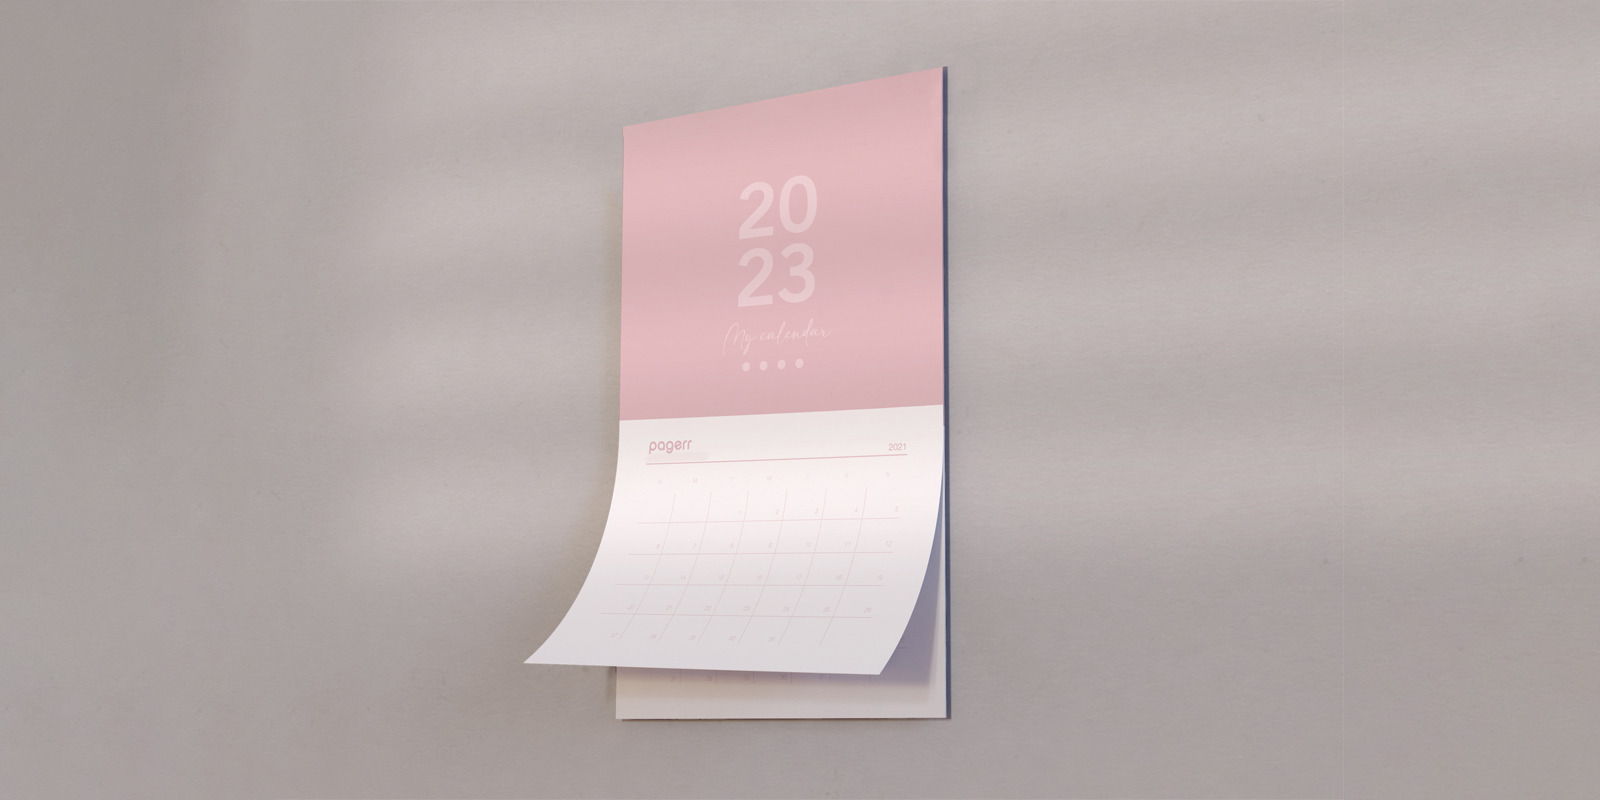 Magnetic calendars in Hamburg - Print with Pagerr